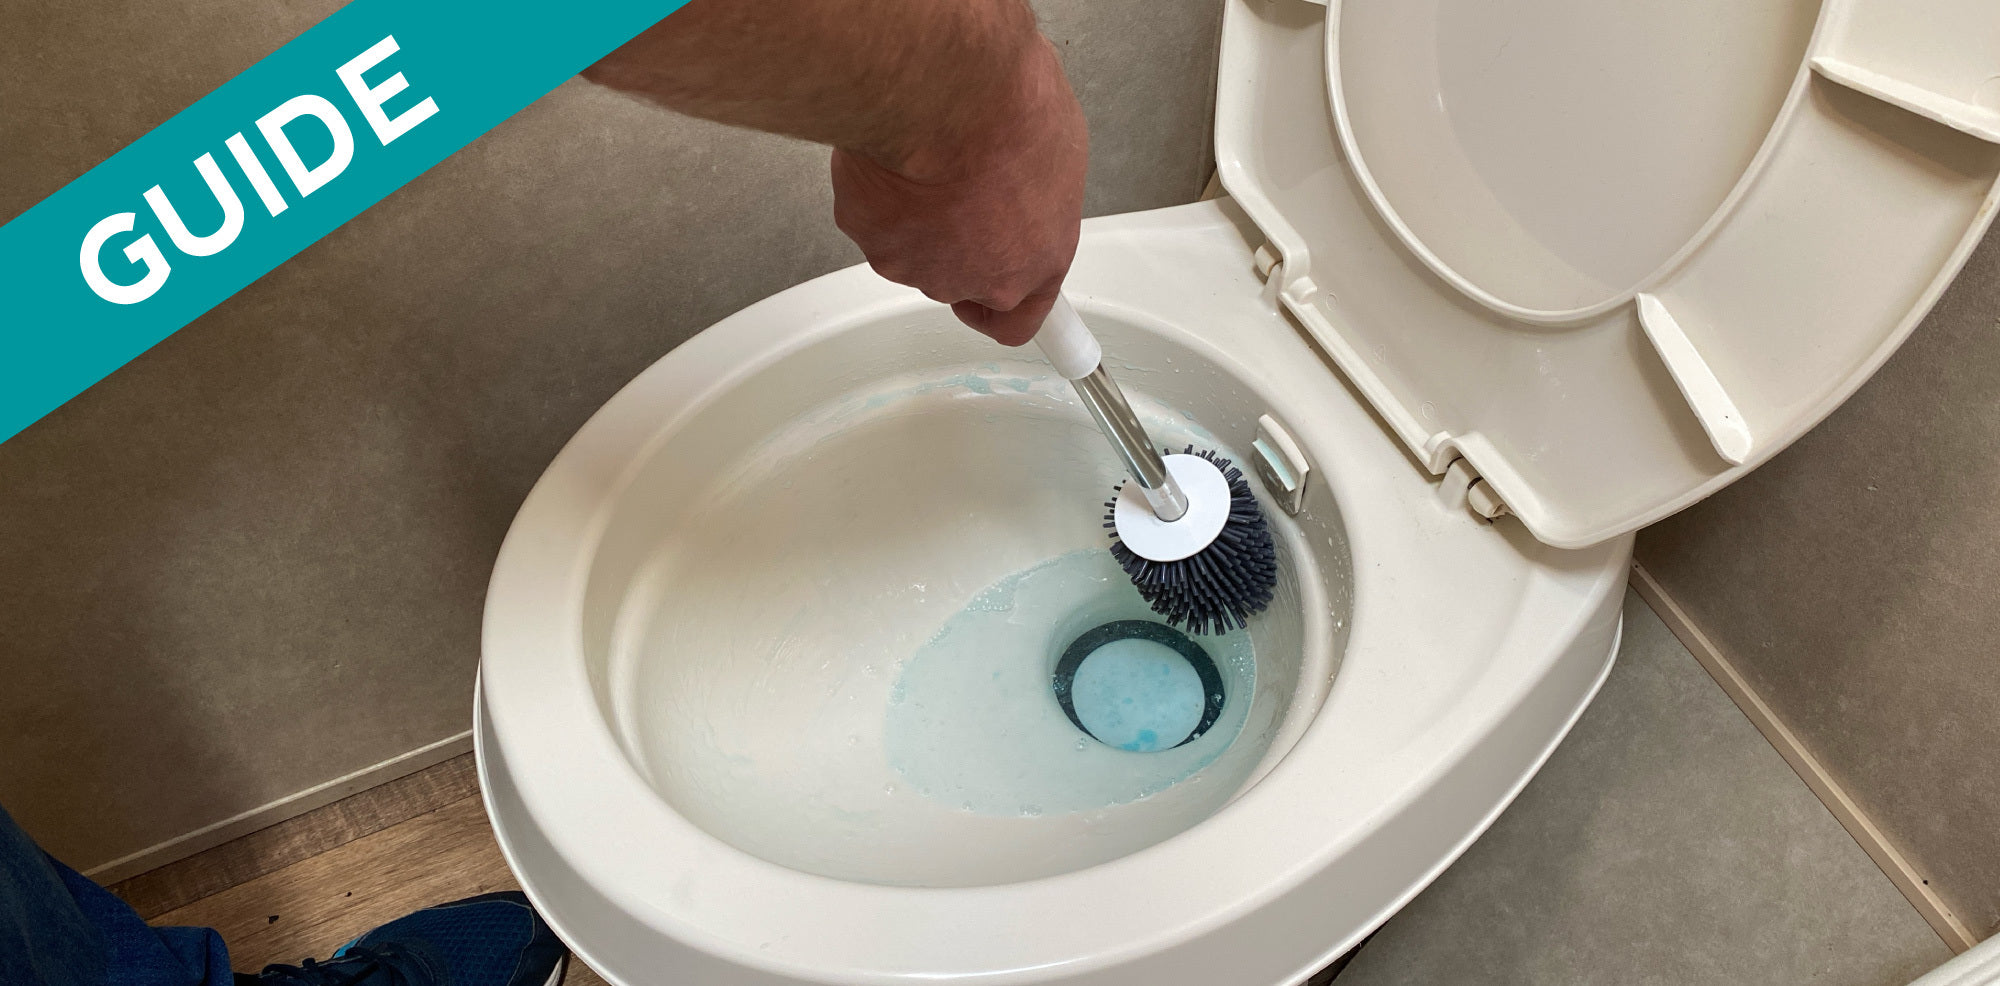 How to clean an RV toilet, use proper cleaning tips for your RV toilet by using an RV toilet cleaner and tank enhancer you avoid waste build up and mineral deposits in your RV toilet.